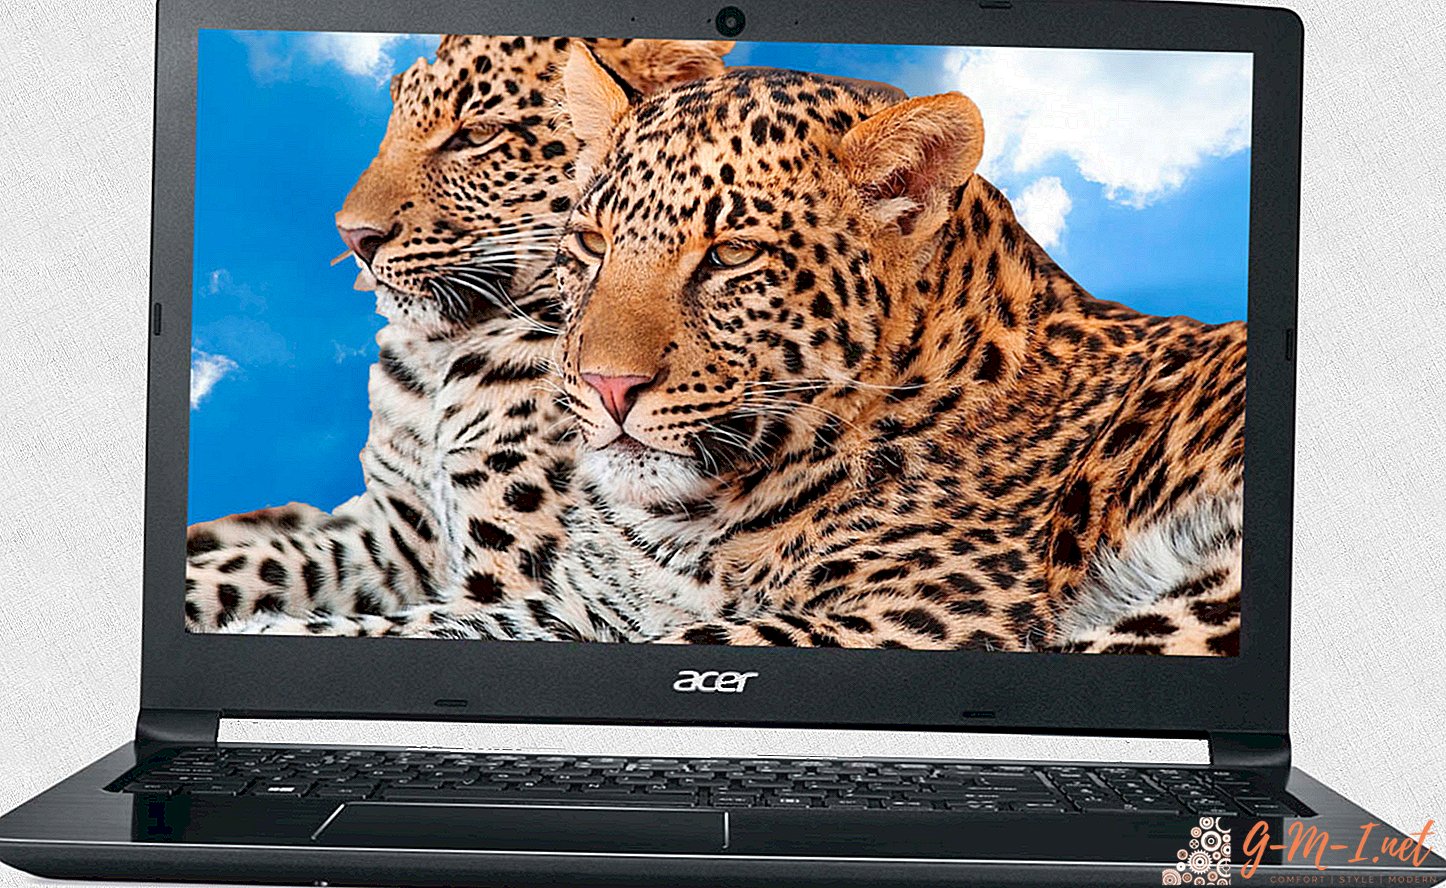 Laptop for Photoshop - which one is better?